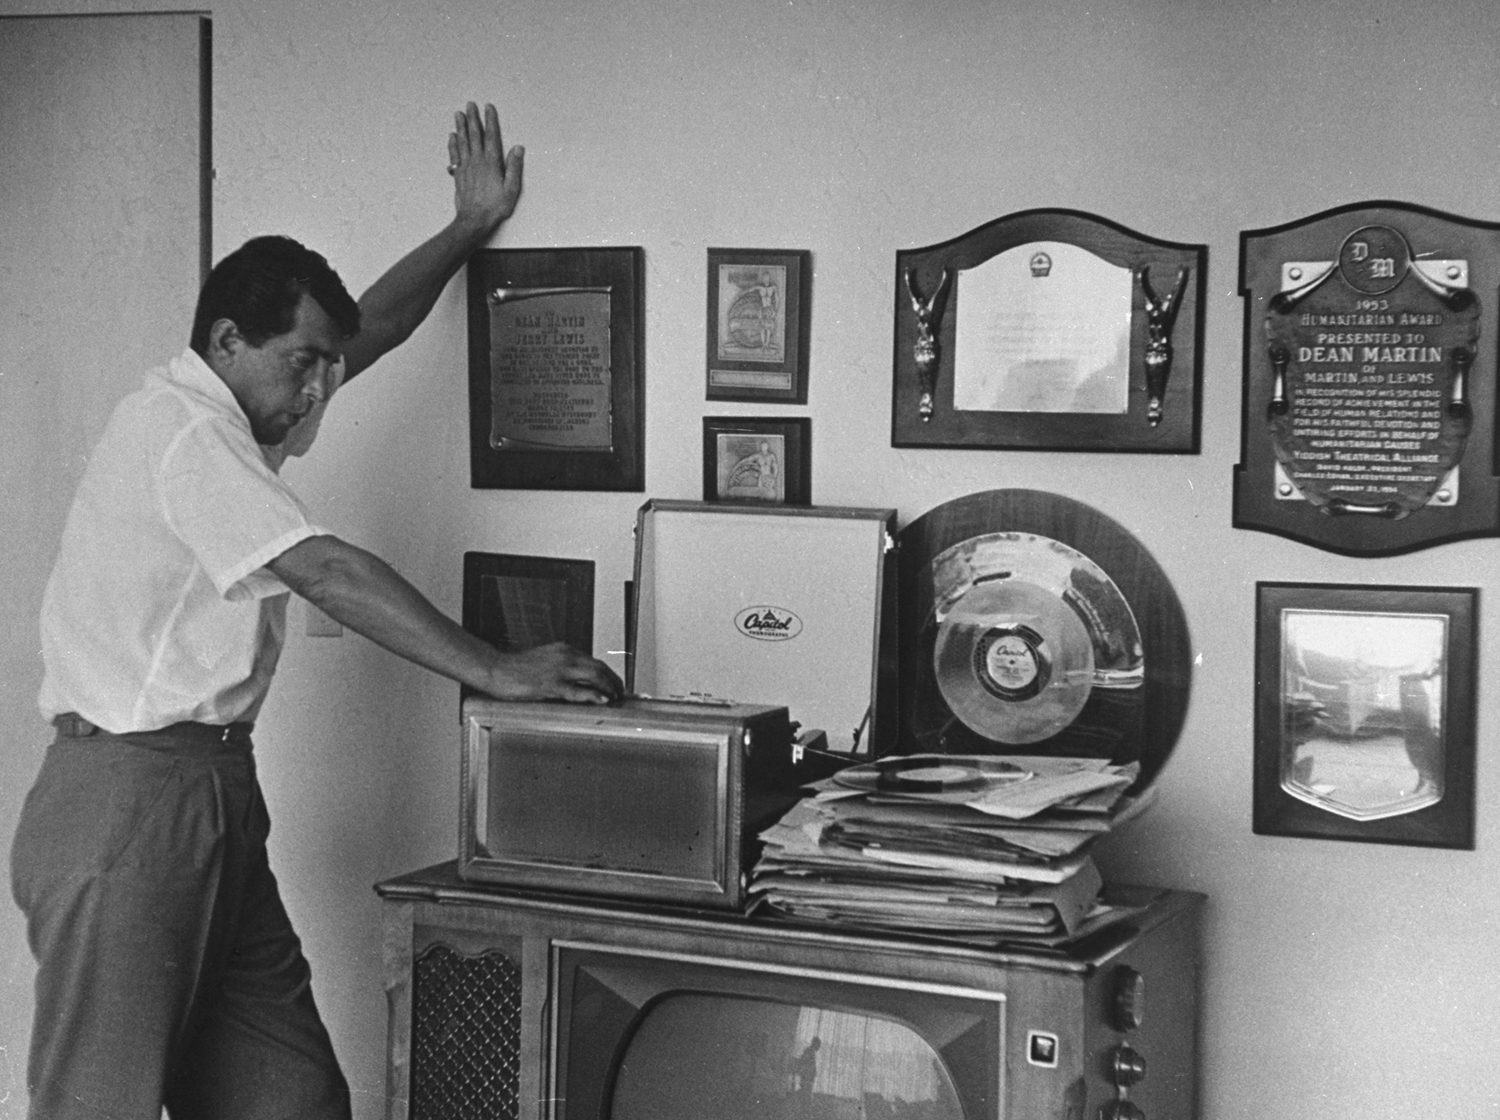 Dean Martin listening to music at home, 1958.